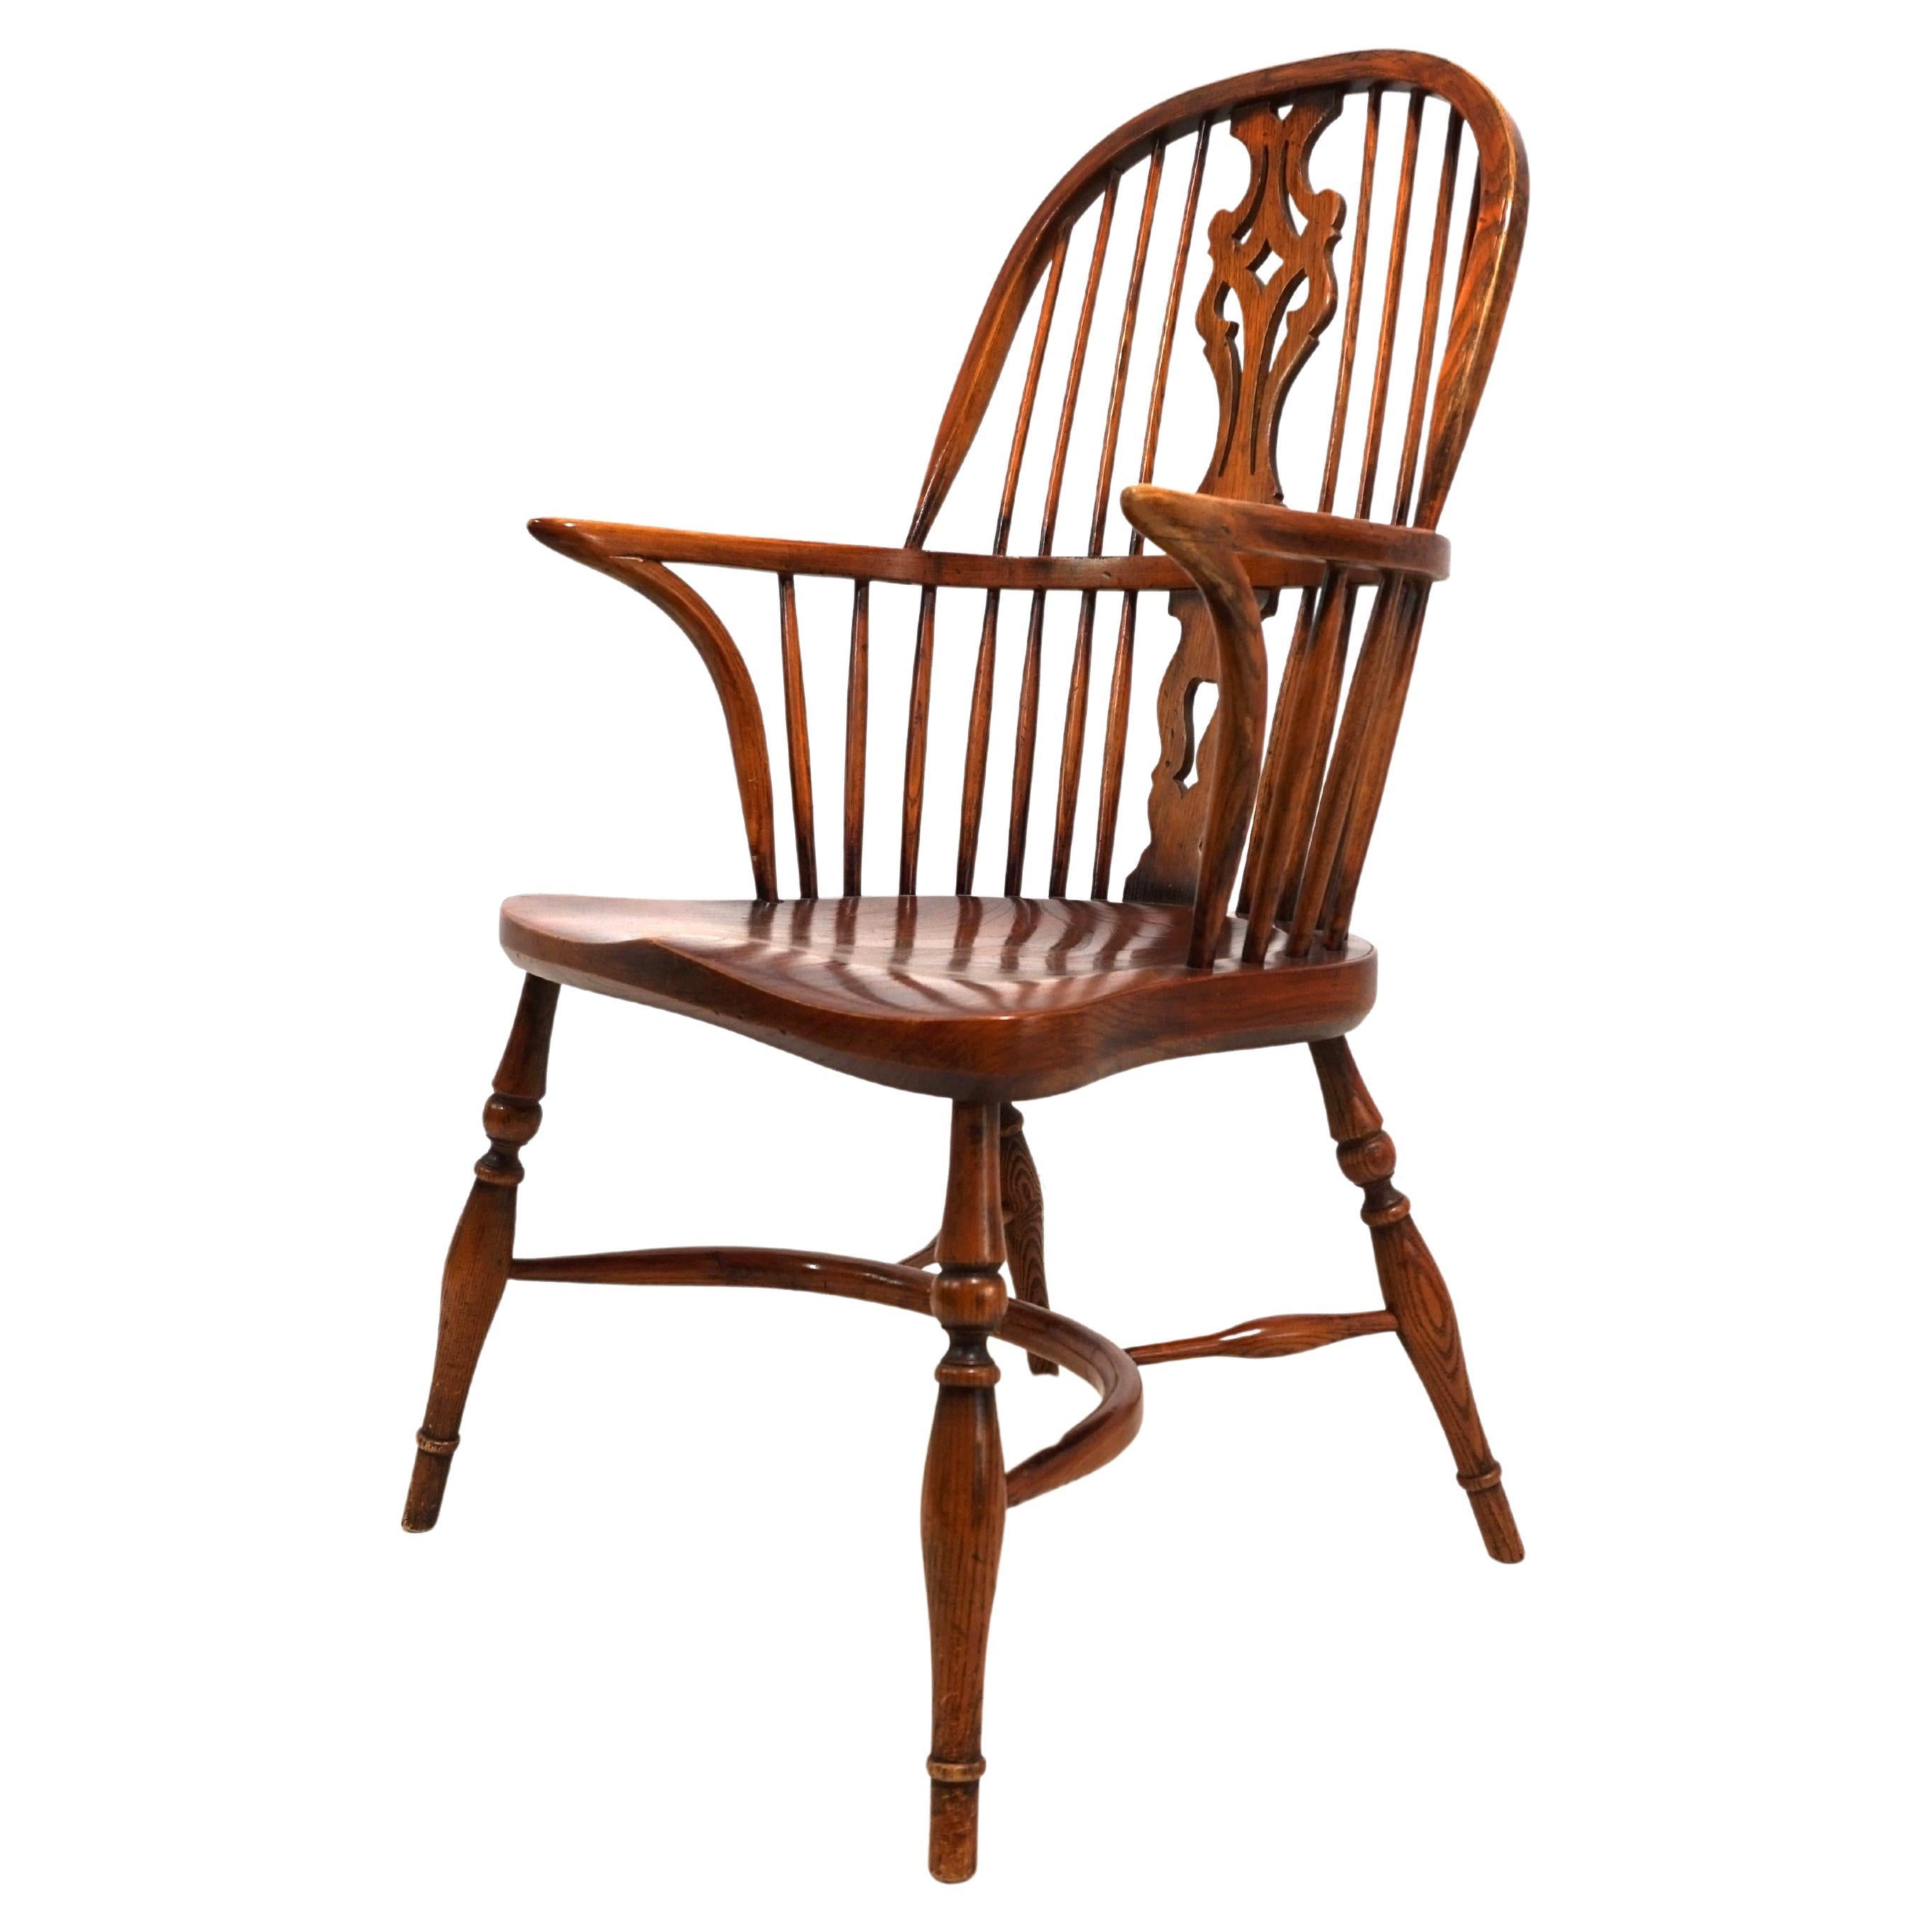 English Windsor chair with armrests